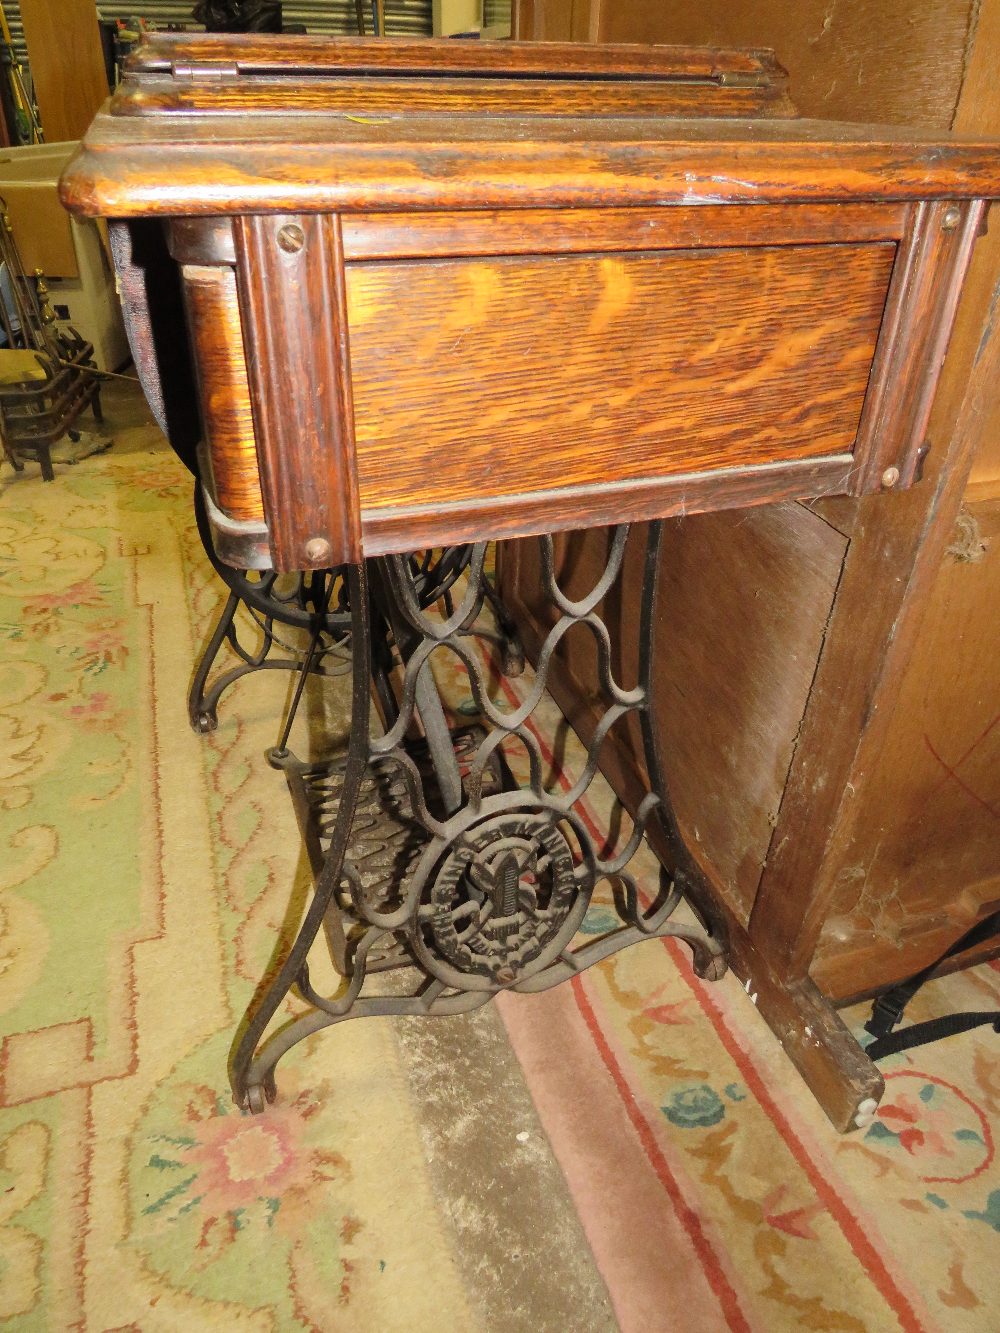 AN OAK AND CAST SINGER TREADLE SEWING MACHINE - Image 5 of 5